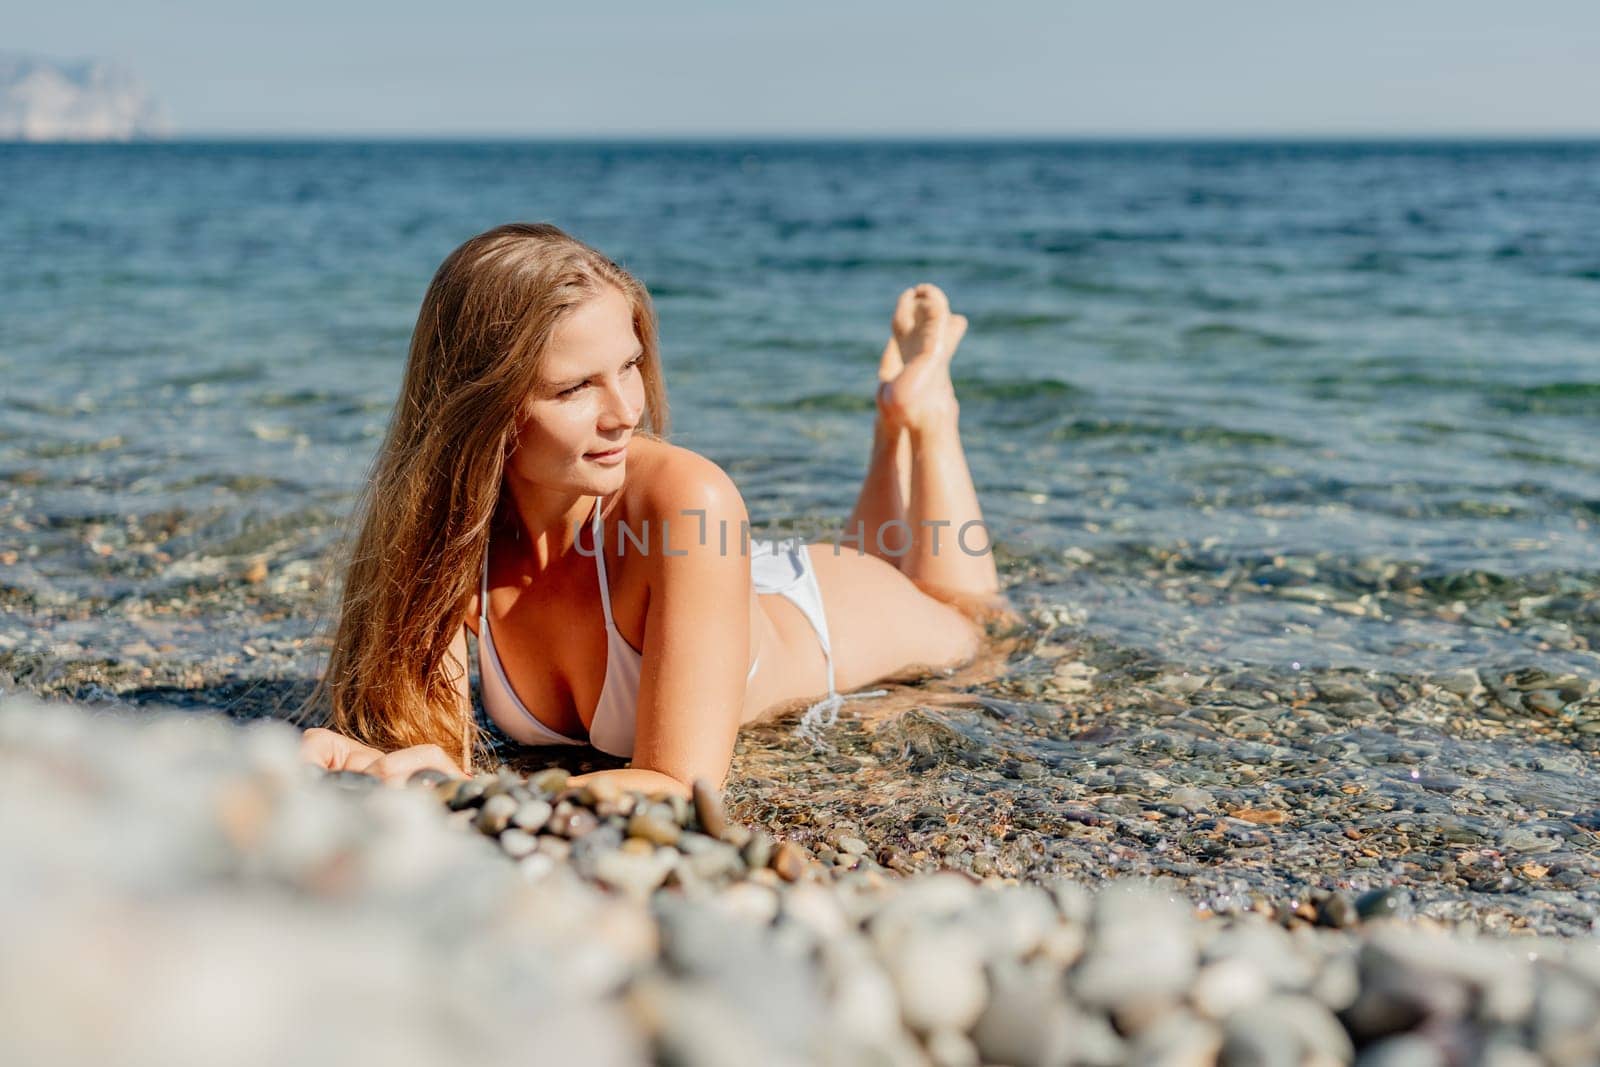 A woman is laying on the beach in a bikini. She is looking at the camera. The beach is rocky and the water is calm